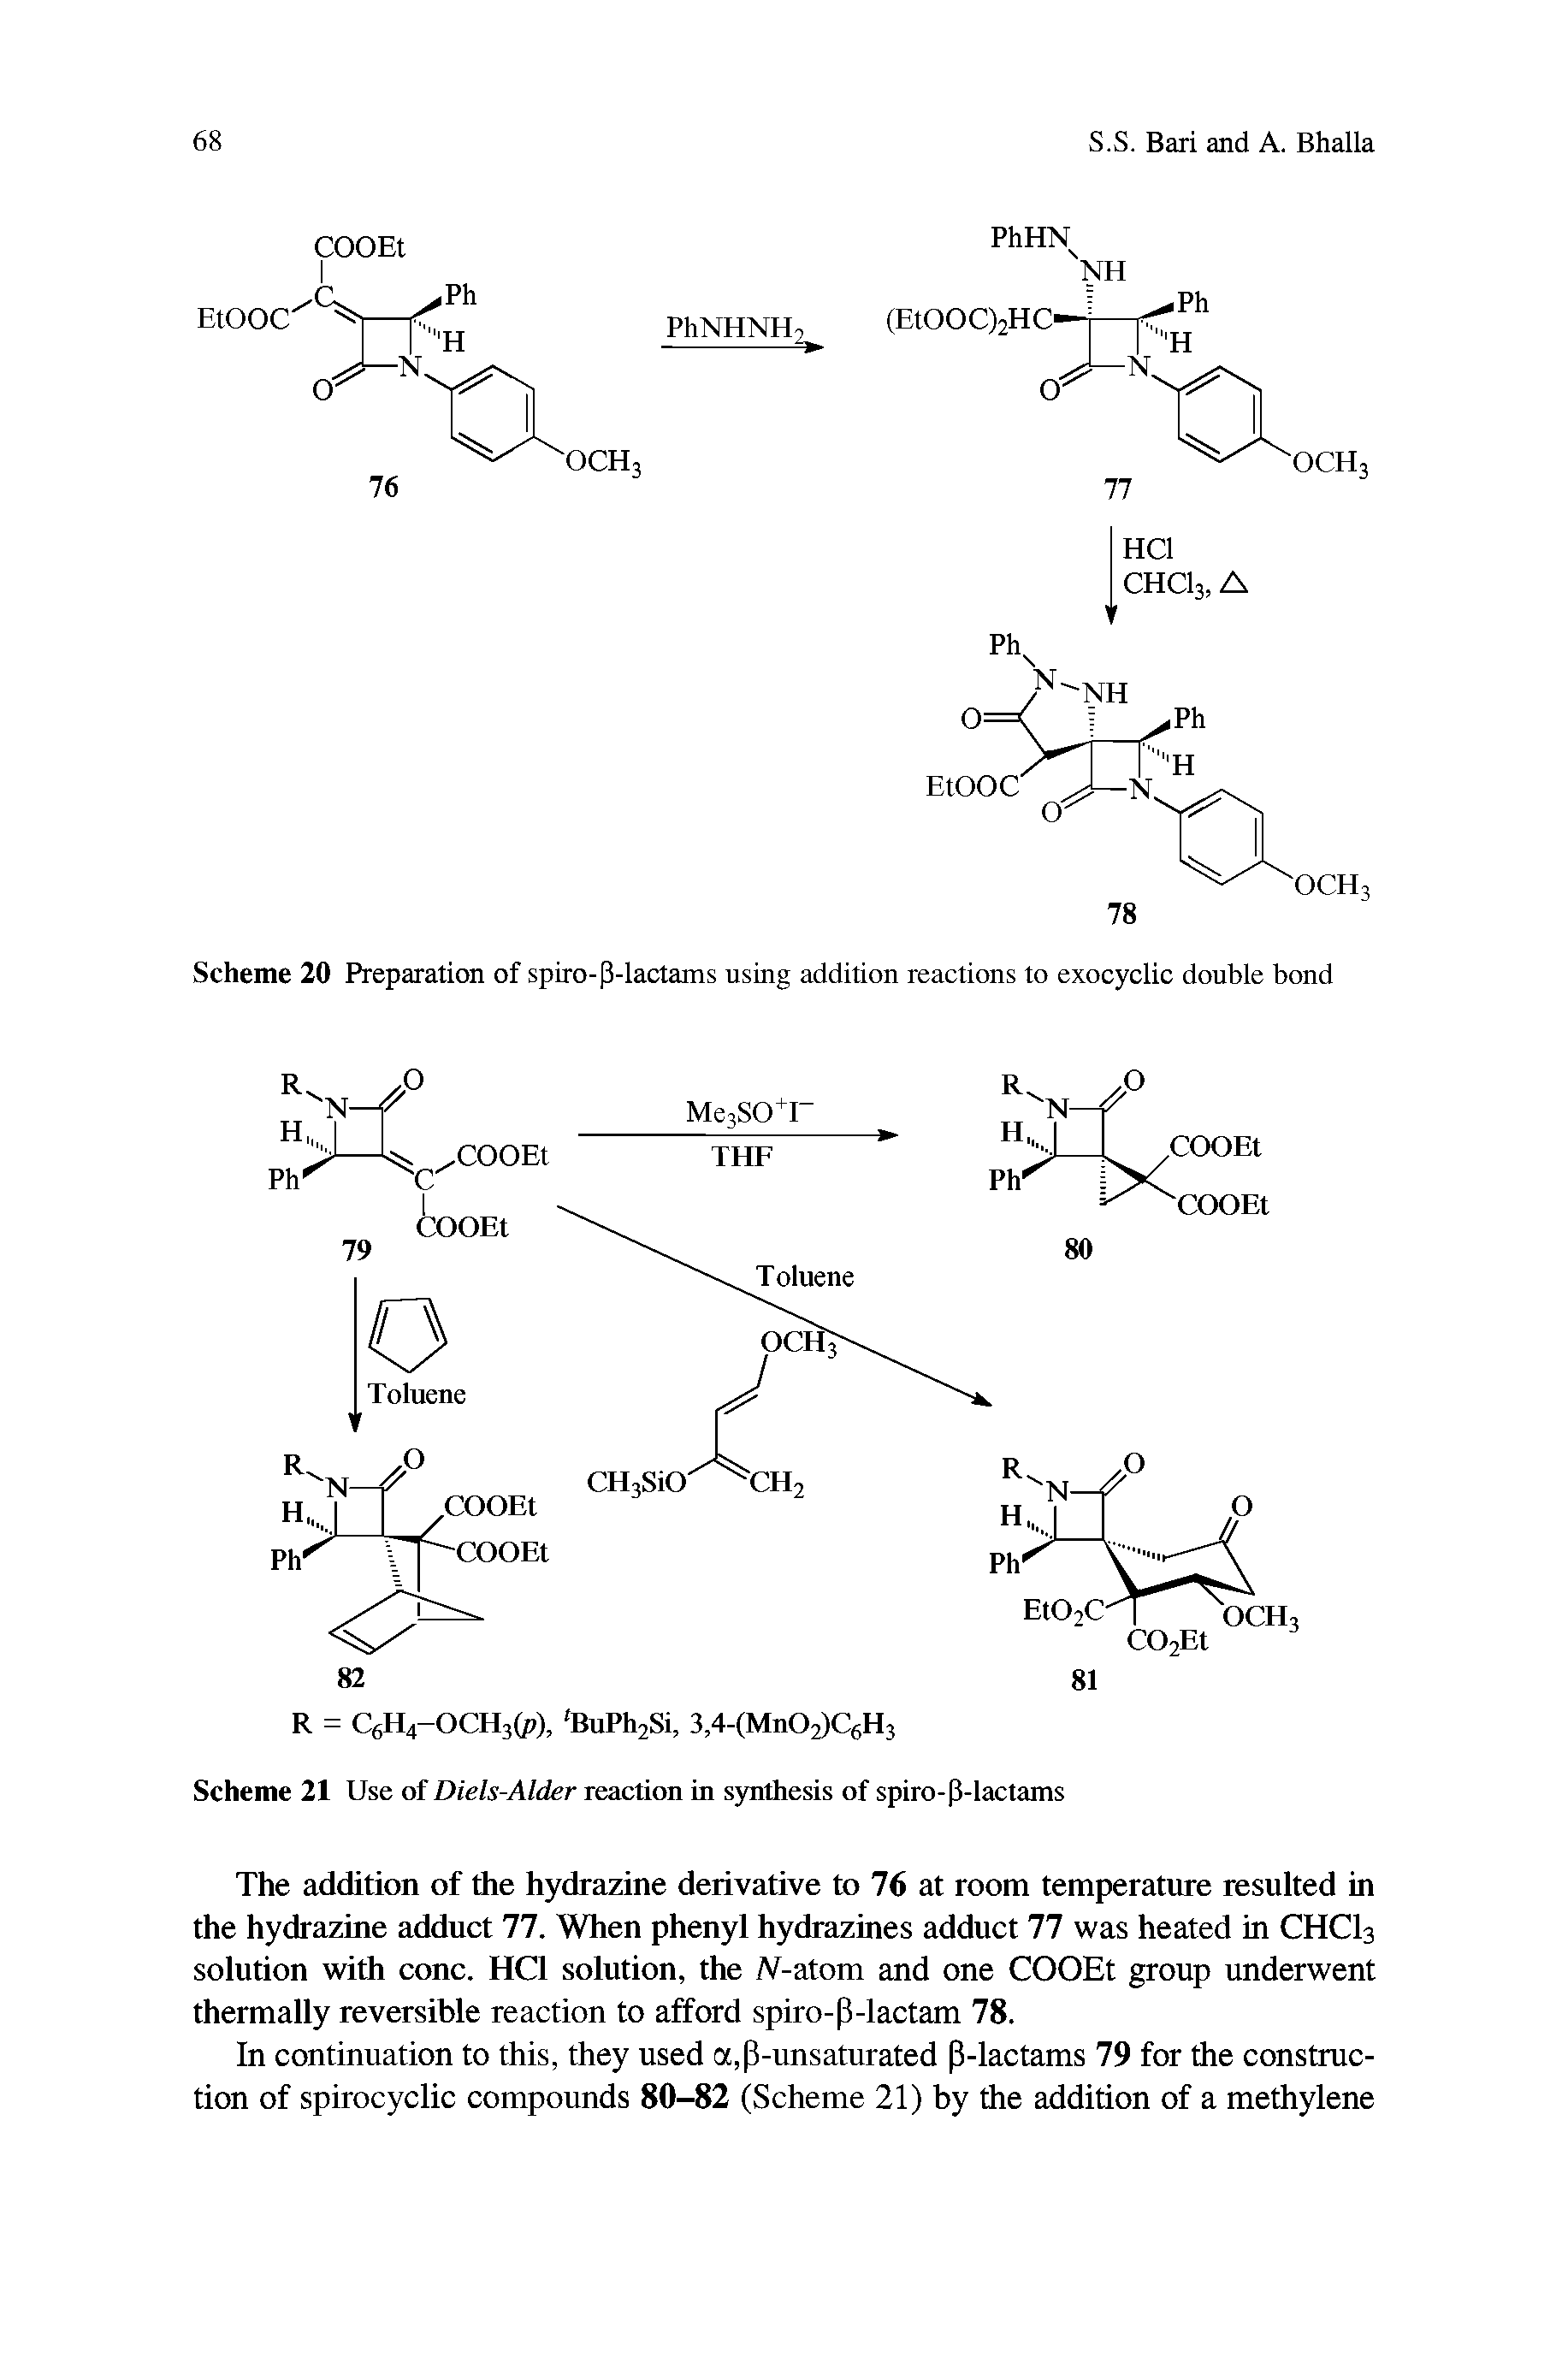 Scheme 21 Use of Diels-Alder reaction in synthesis of spiro-P-lactams...